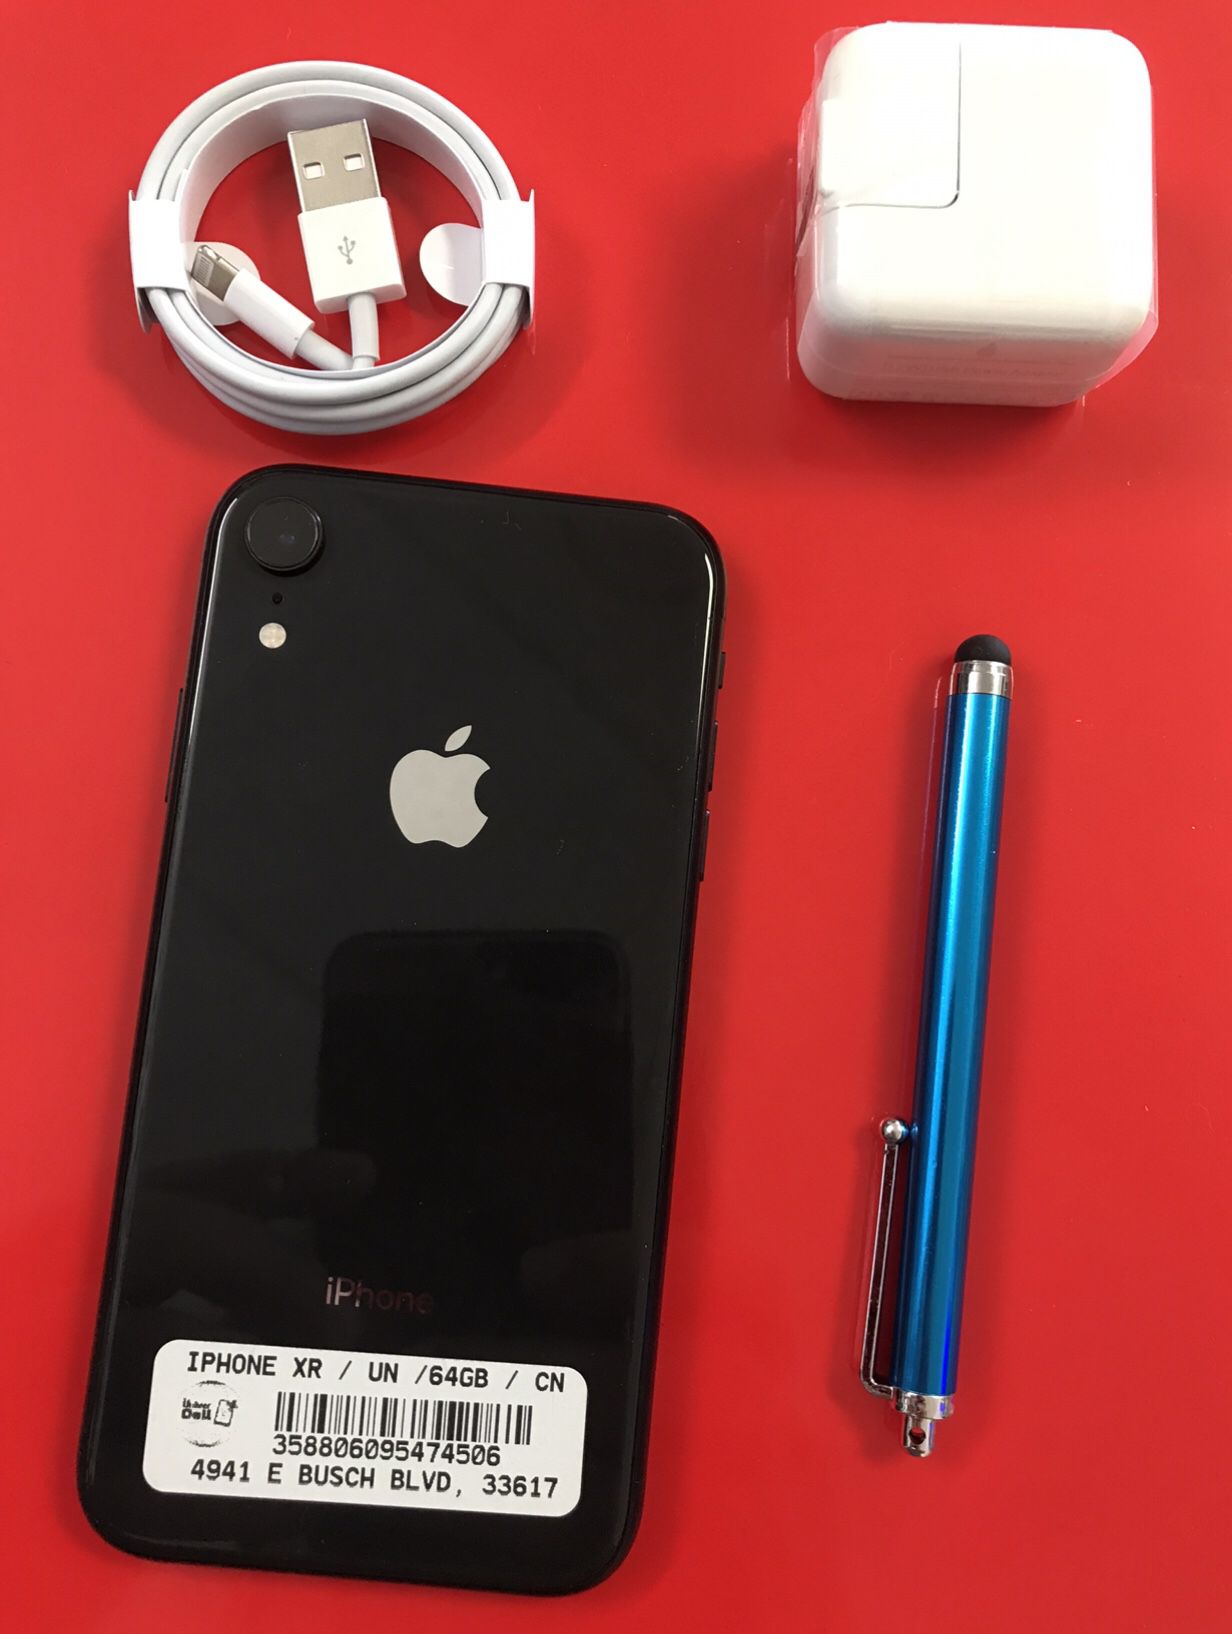 Unlocked Clean With Charger & Warranty Has 64Gb iPhone XR On Sale ! @ Univercell 4941 E Busch Blvd #170, Tampa 33617